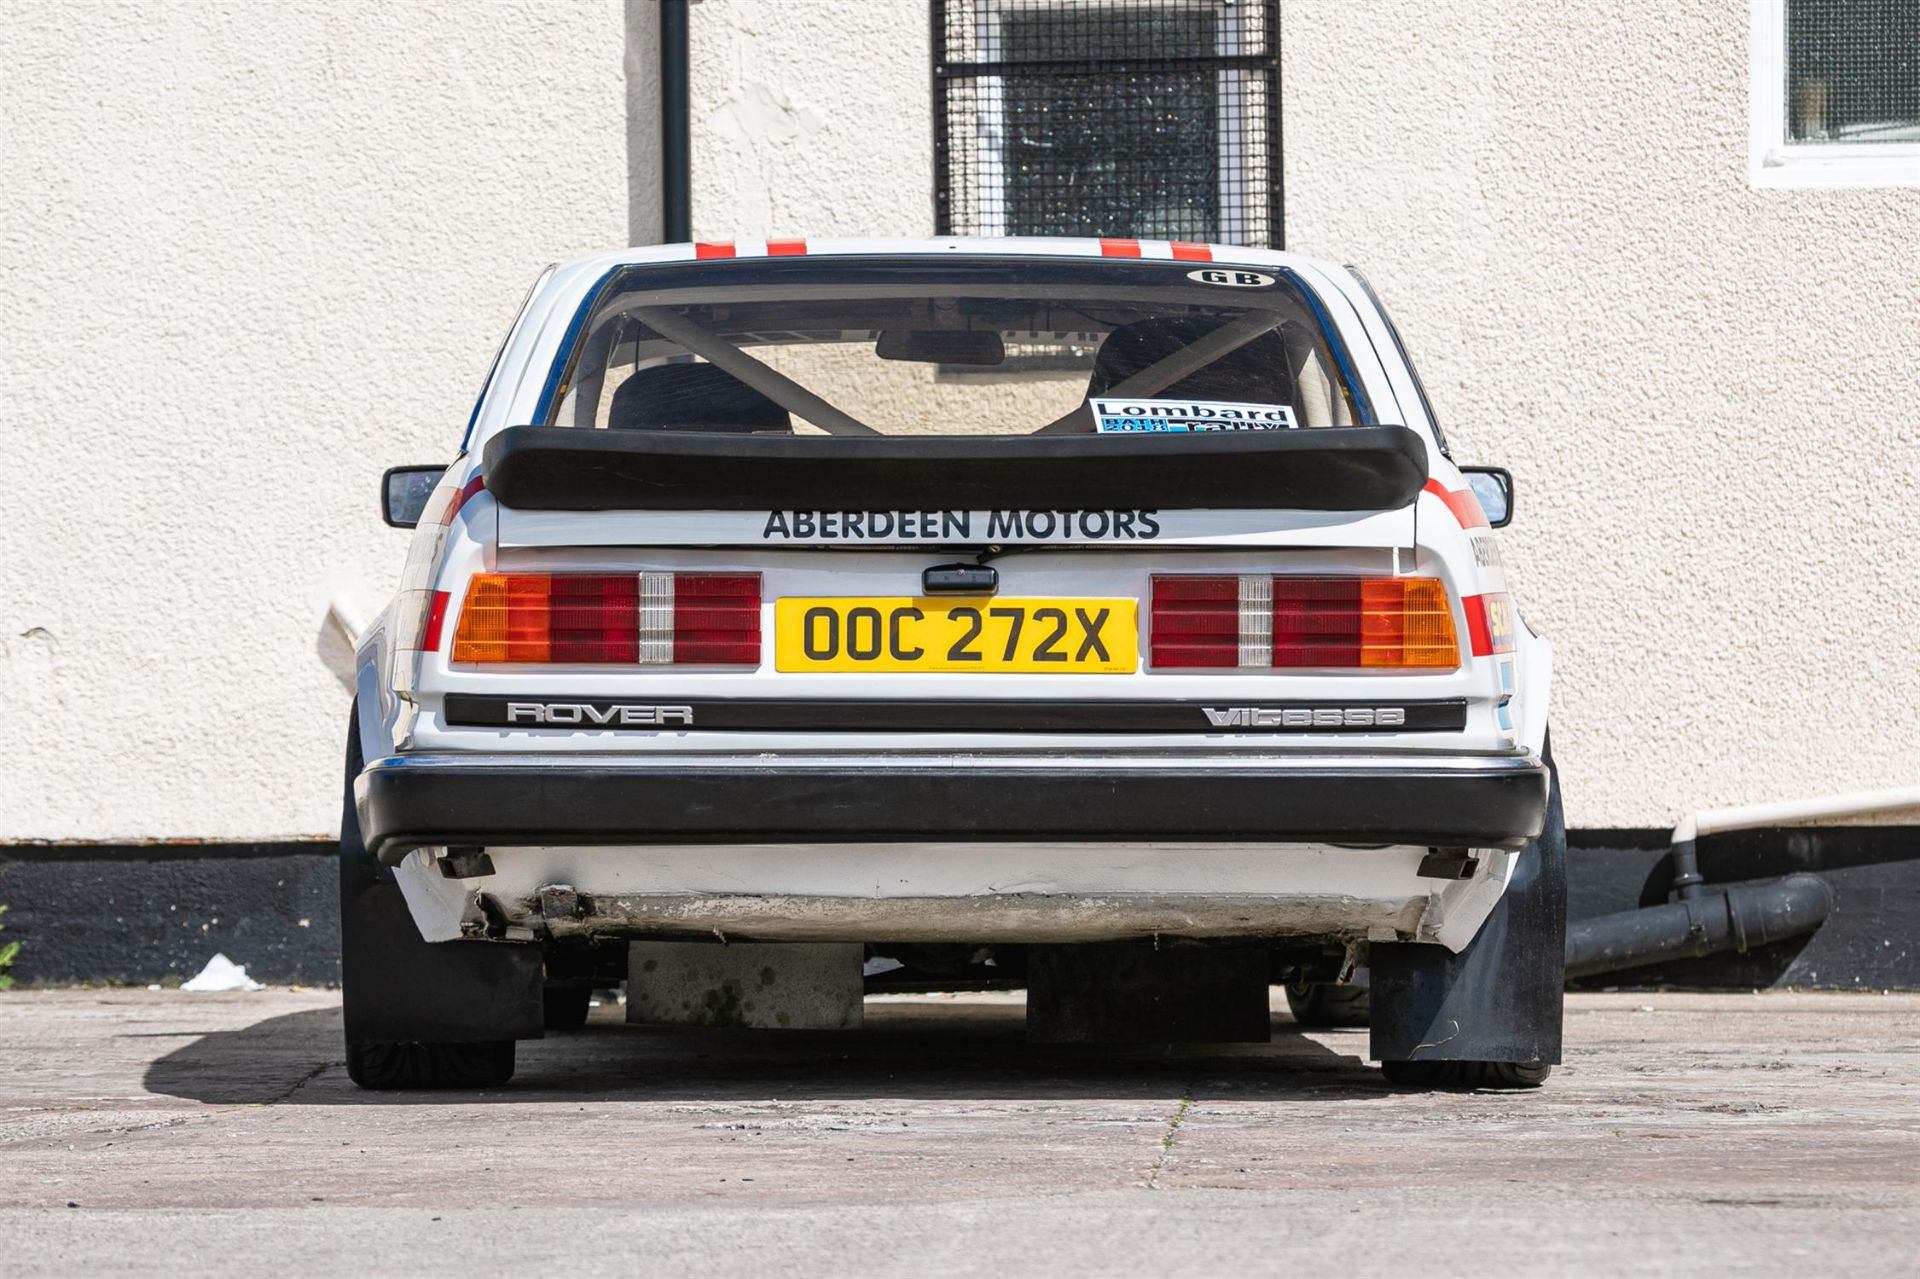 1982 Rover SD1 Vitesse 'Group A' Works Rally Car - Image 9 of 10